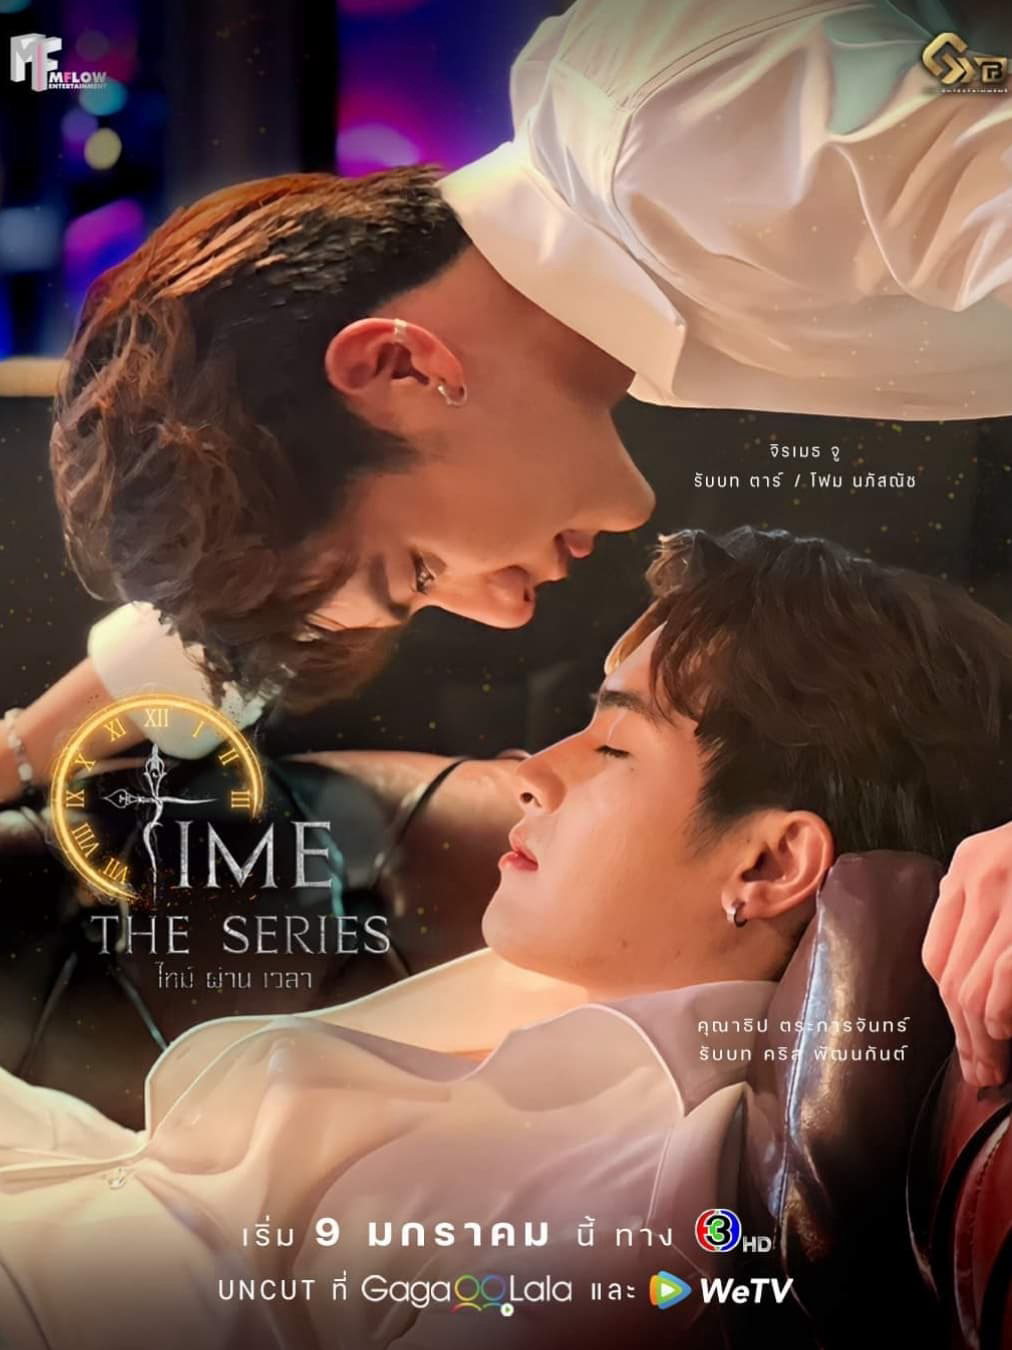 Time the Series - Time the Series